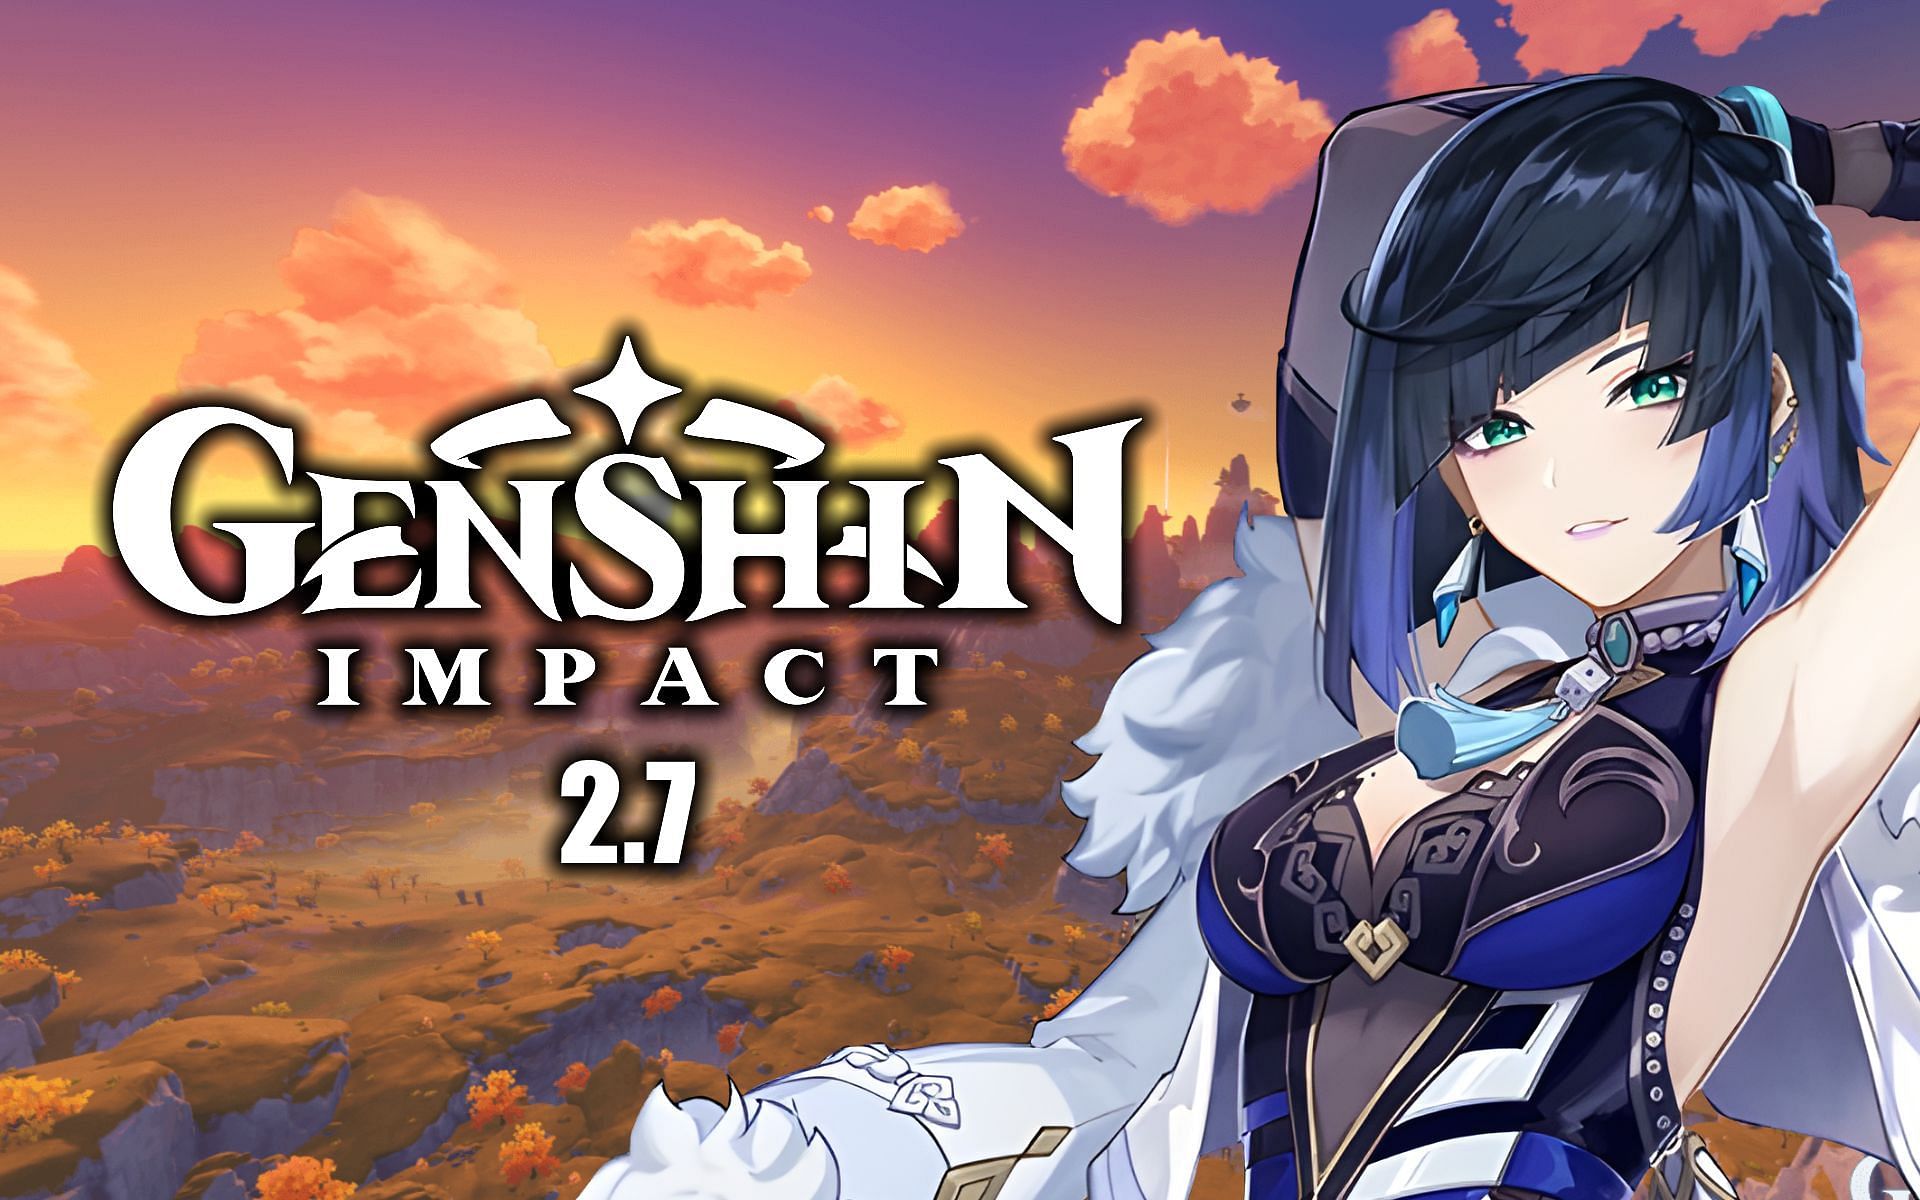 The Genshin Impact 2.7 Livestream will likely happen at the end of April (Image via miHoYo)